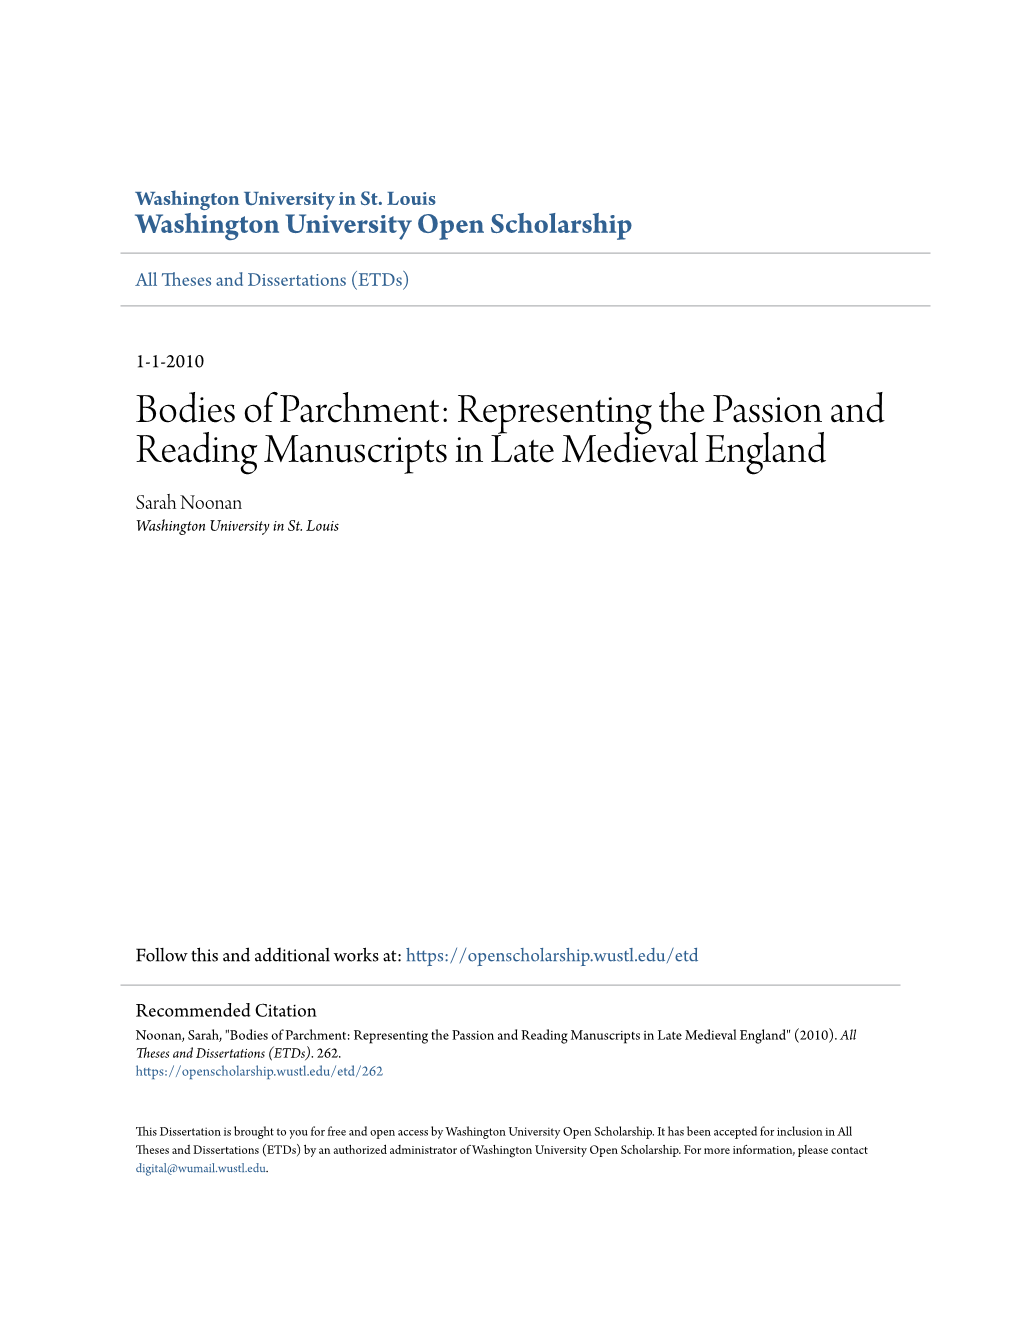 Representing the Passion and Reading Manuscripts in Late Medieval England Sarah Noonan Washington University in St